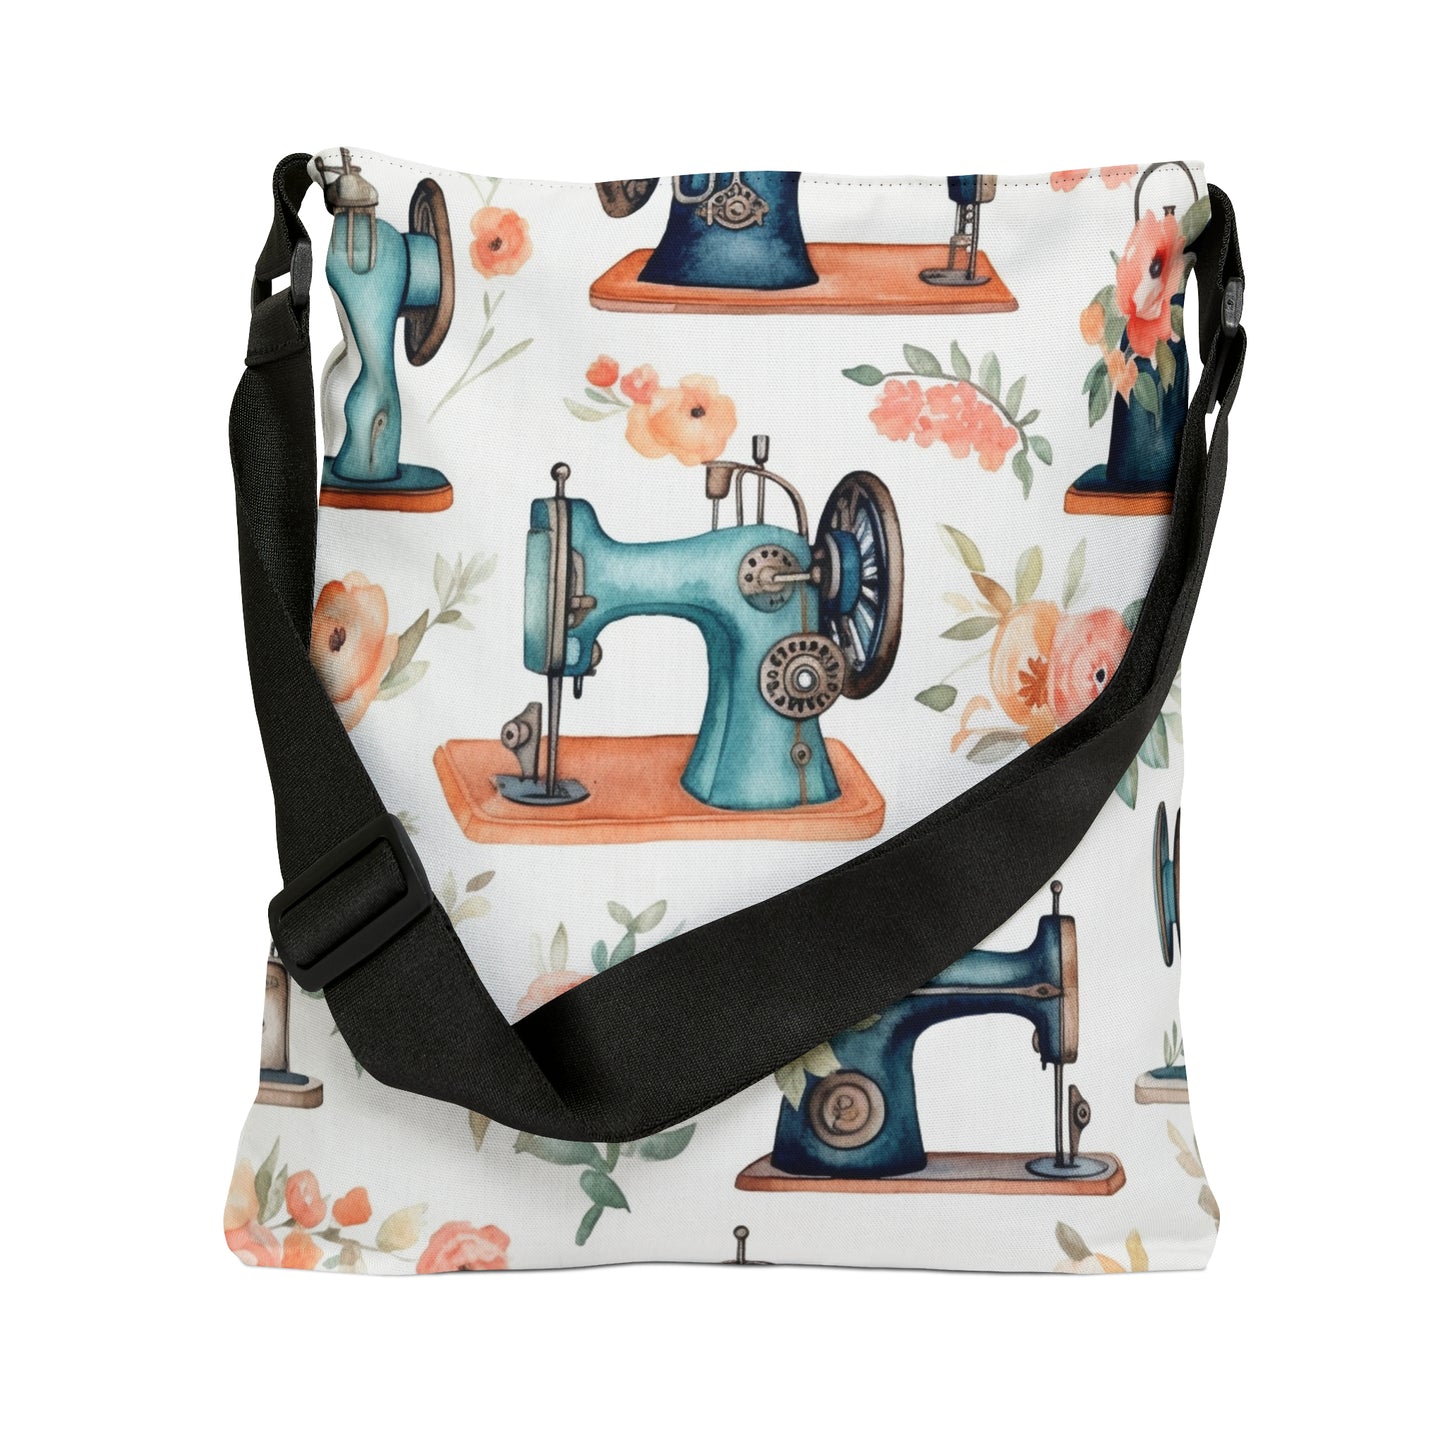 Watercolor Sewing Machines & Floral Bouquets: Antique Feminine Minimalist Styling - Adjustable Tote Bag (AOP)